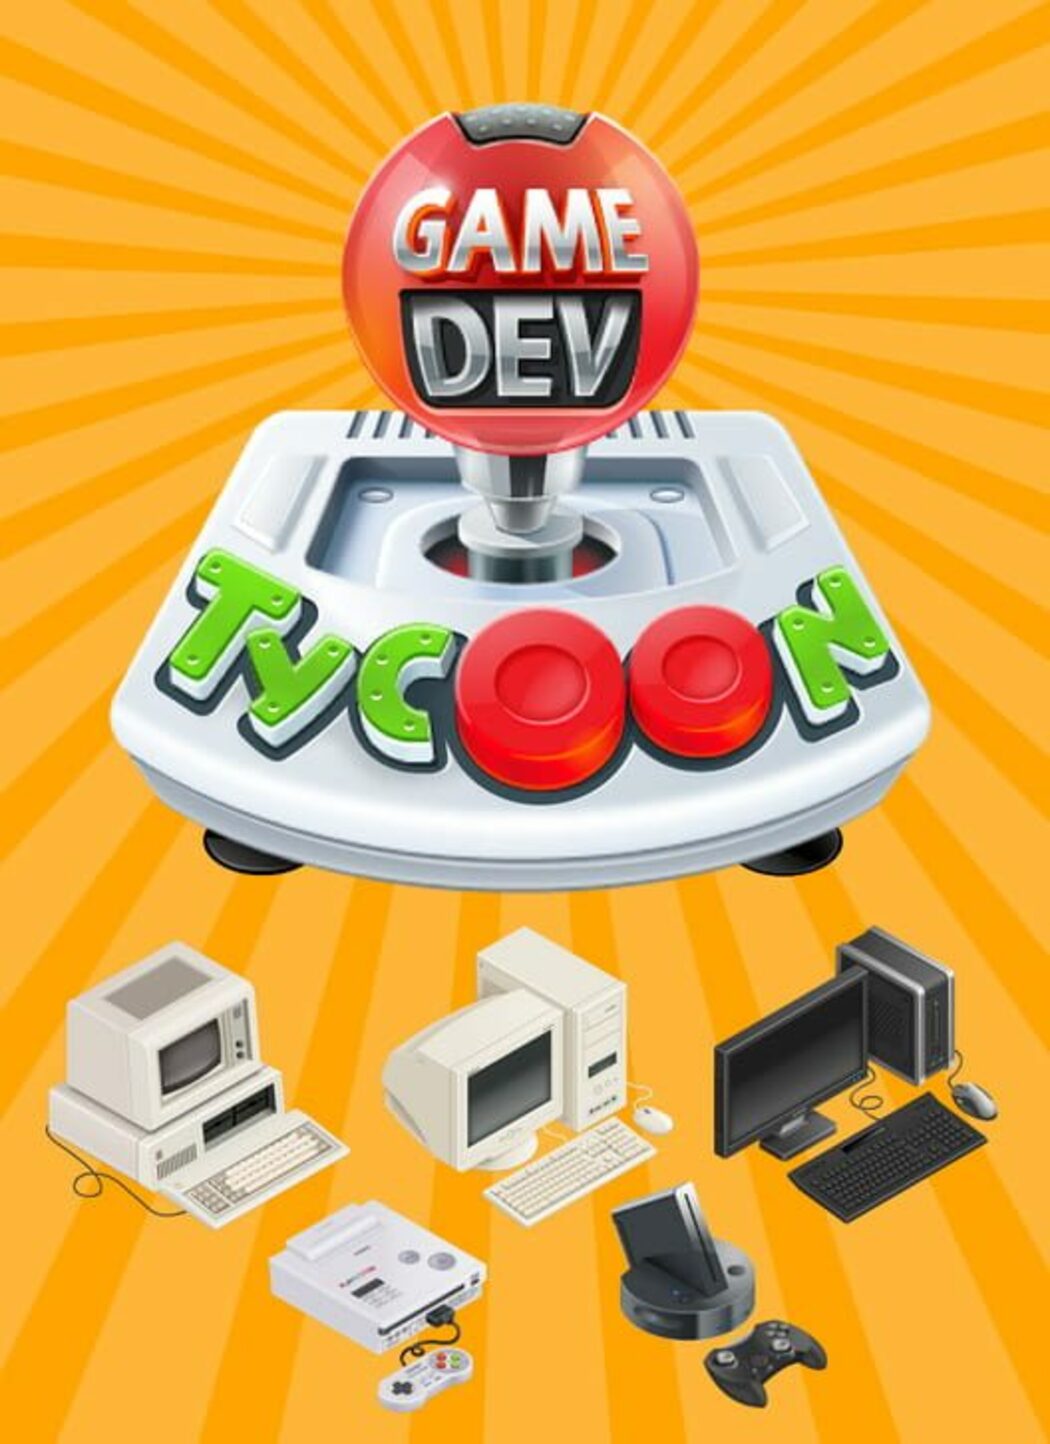 game studio tycoon 2 review